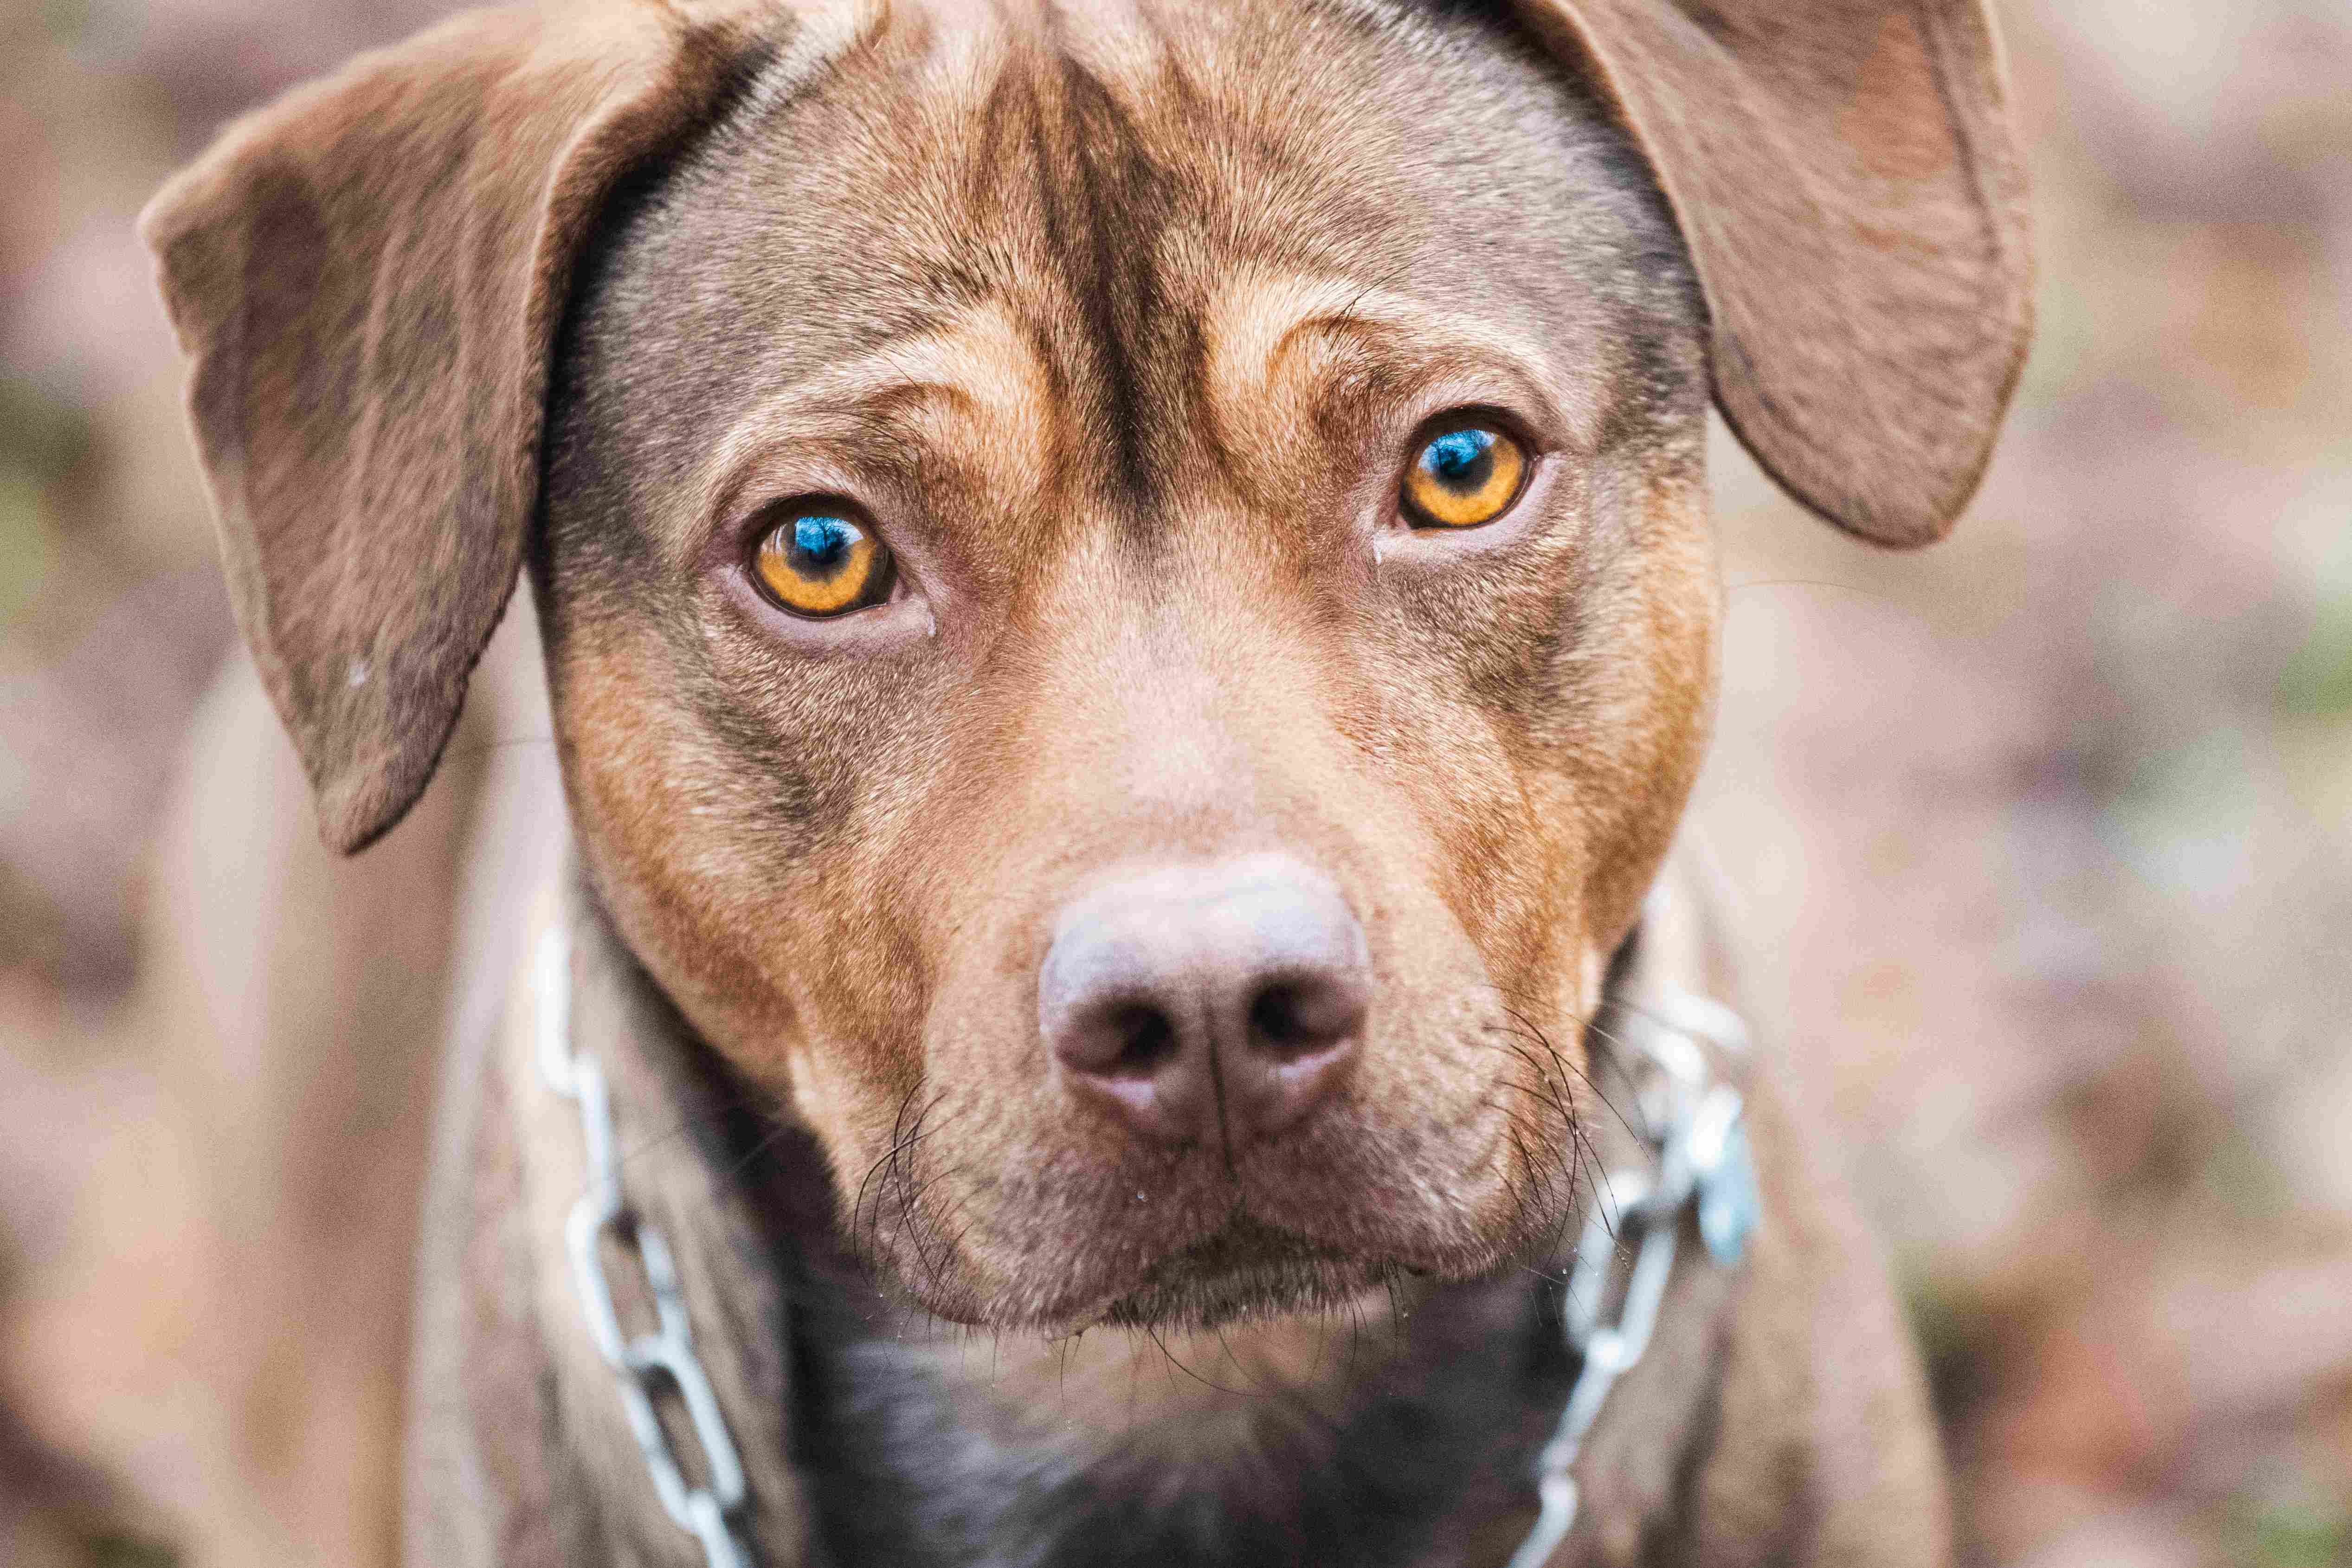 said pitbull puppy looking into camera with chain collar